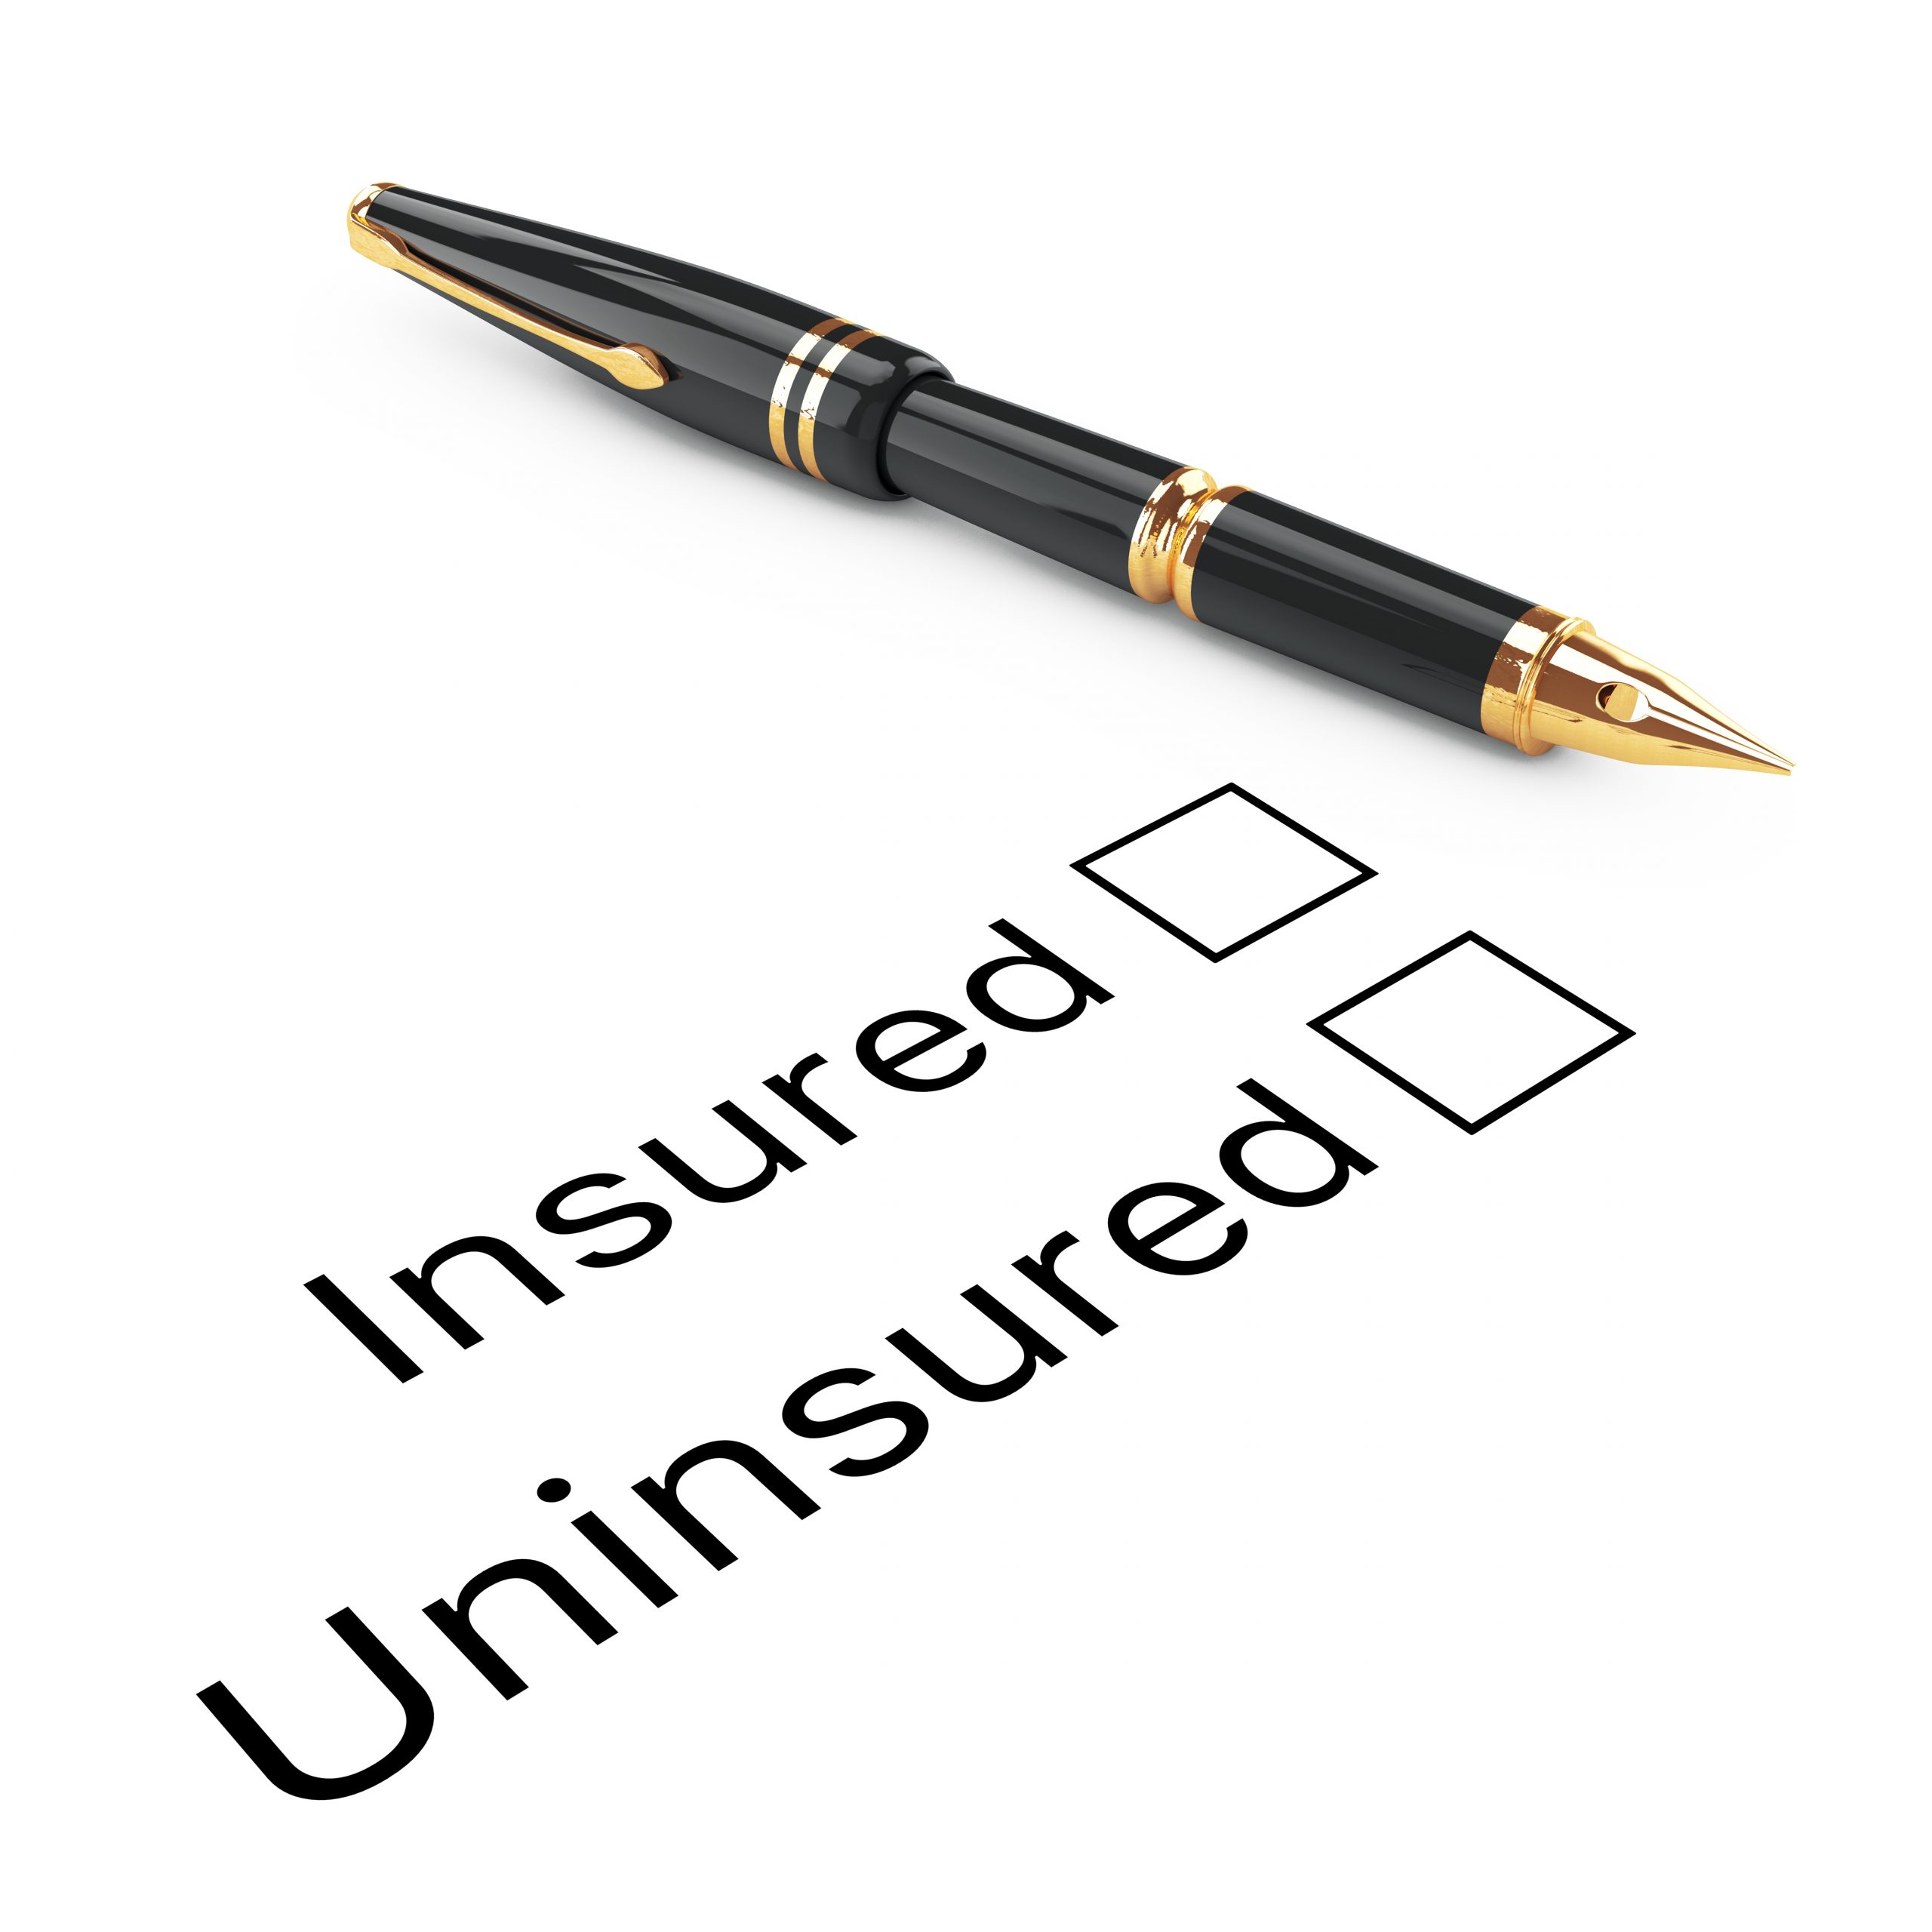 3 Mistakes to Avoid While Planning Your Insurance